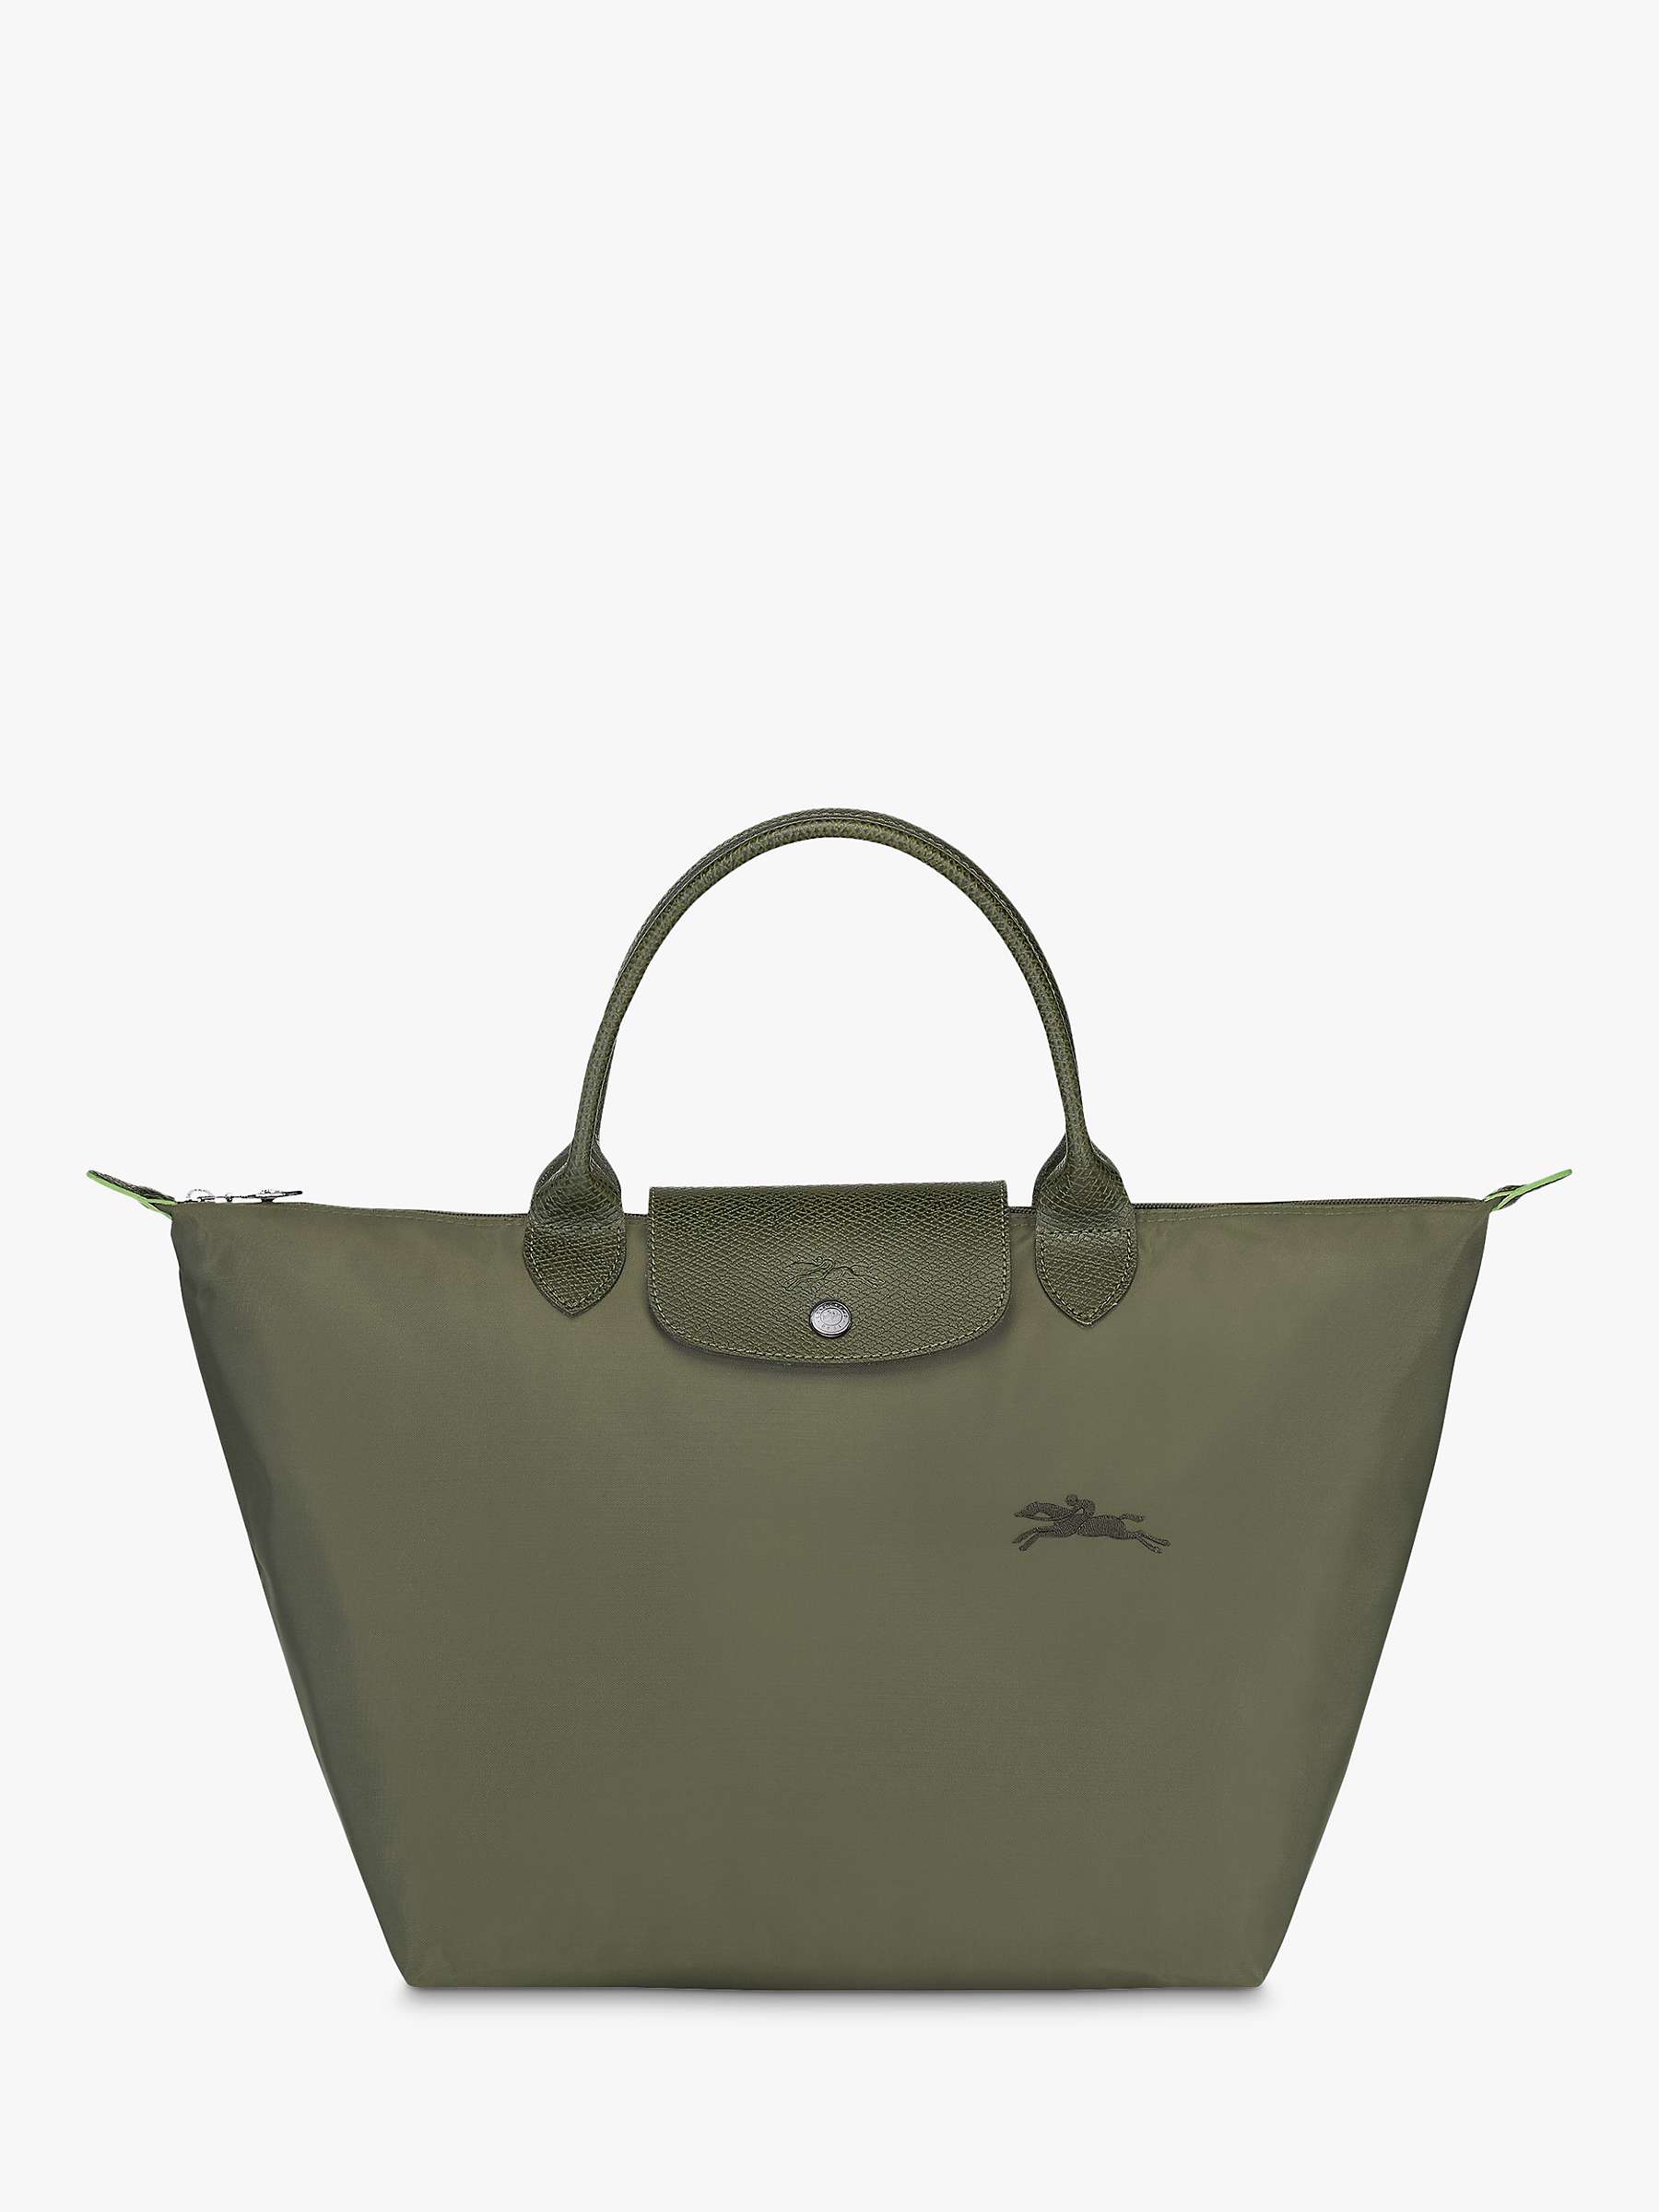 Buy Longchamp Le Pliage Green Recycled Canvas Medium Top Handle Bag Online at johnlewis.com